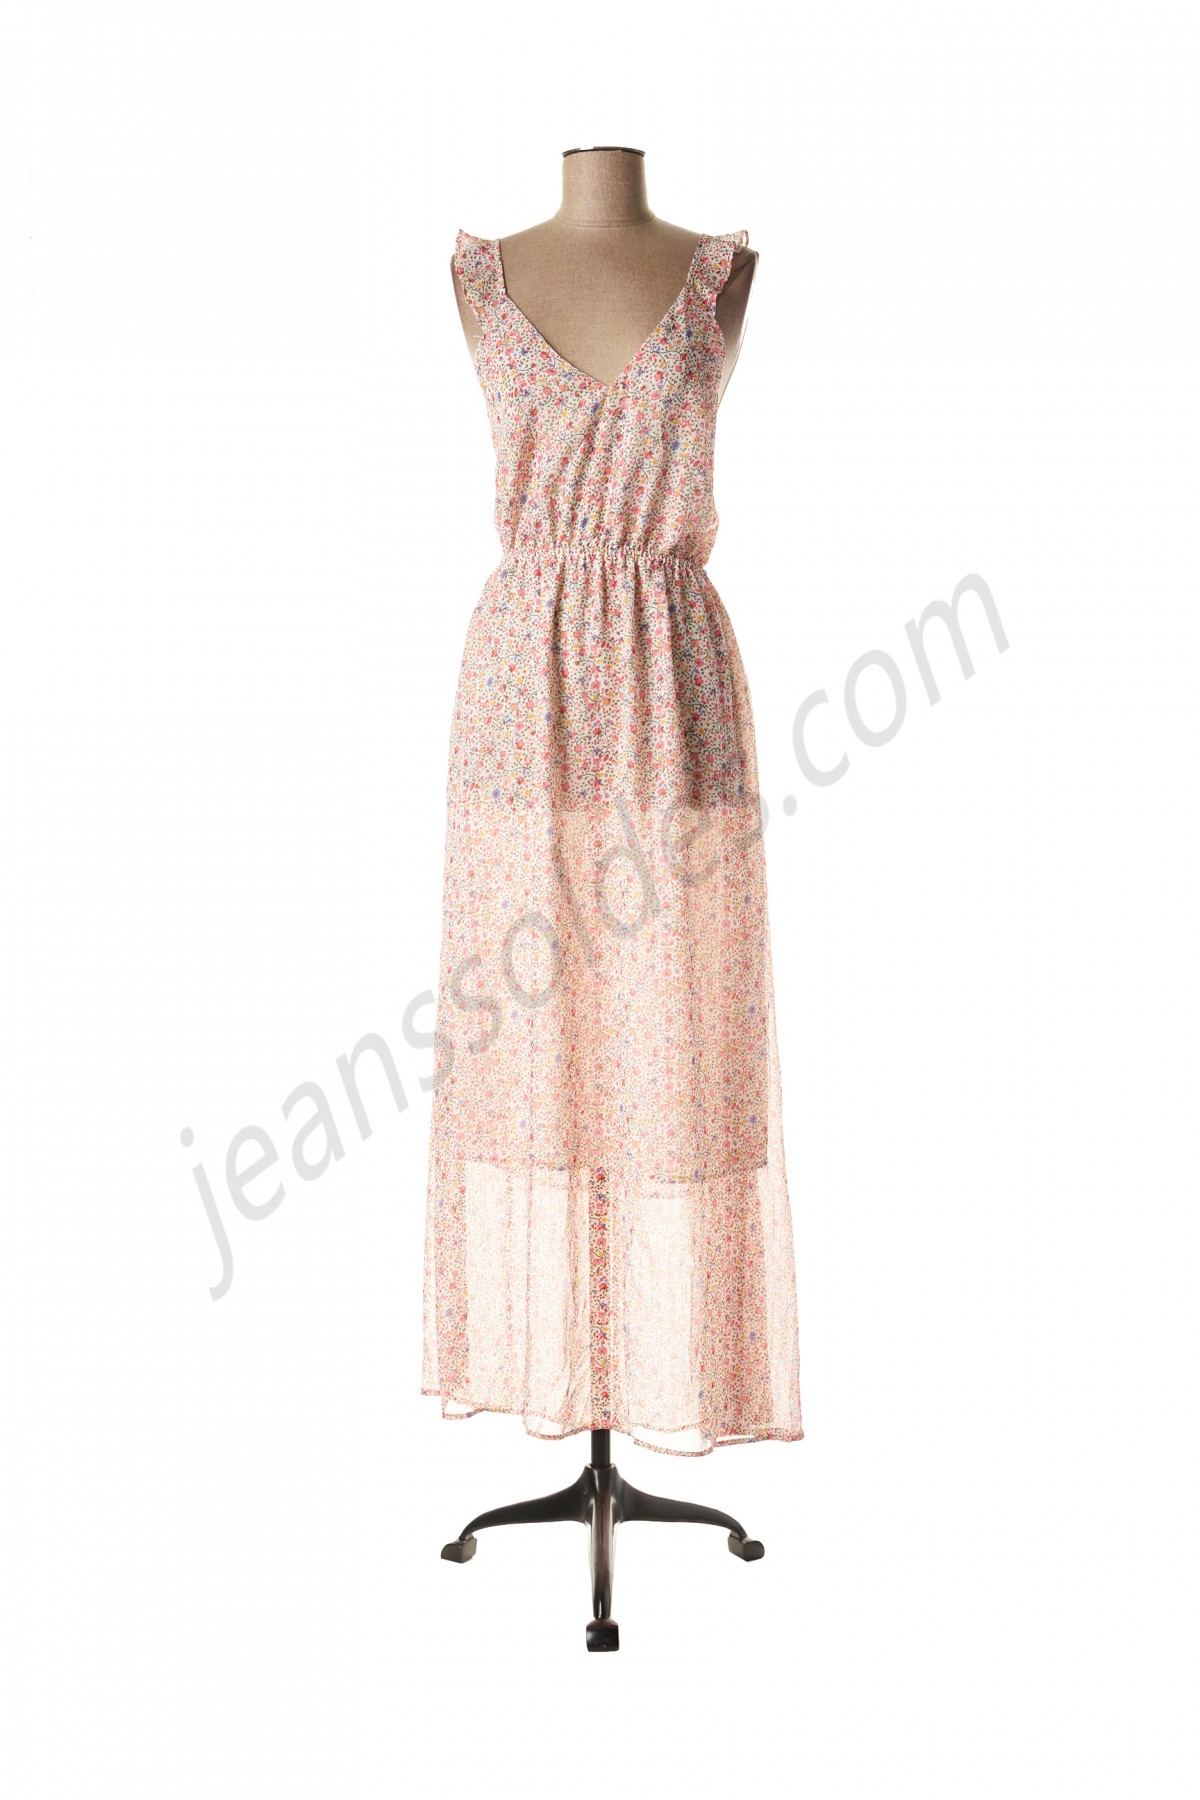 peace and love-Robe longue déstockage - -0